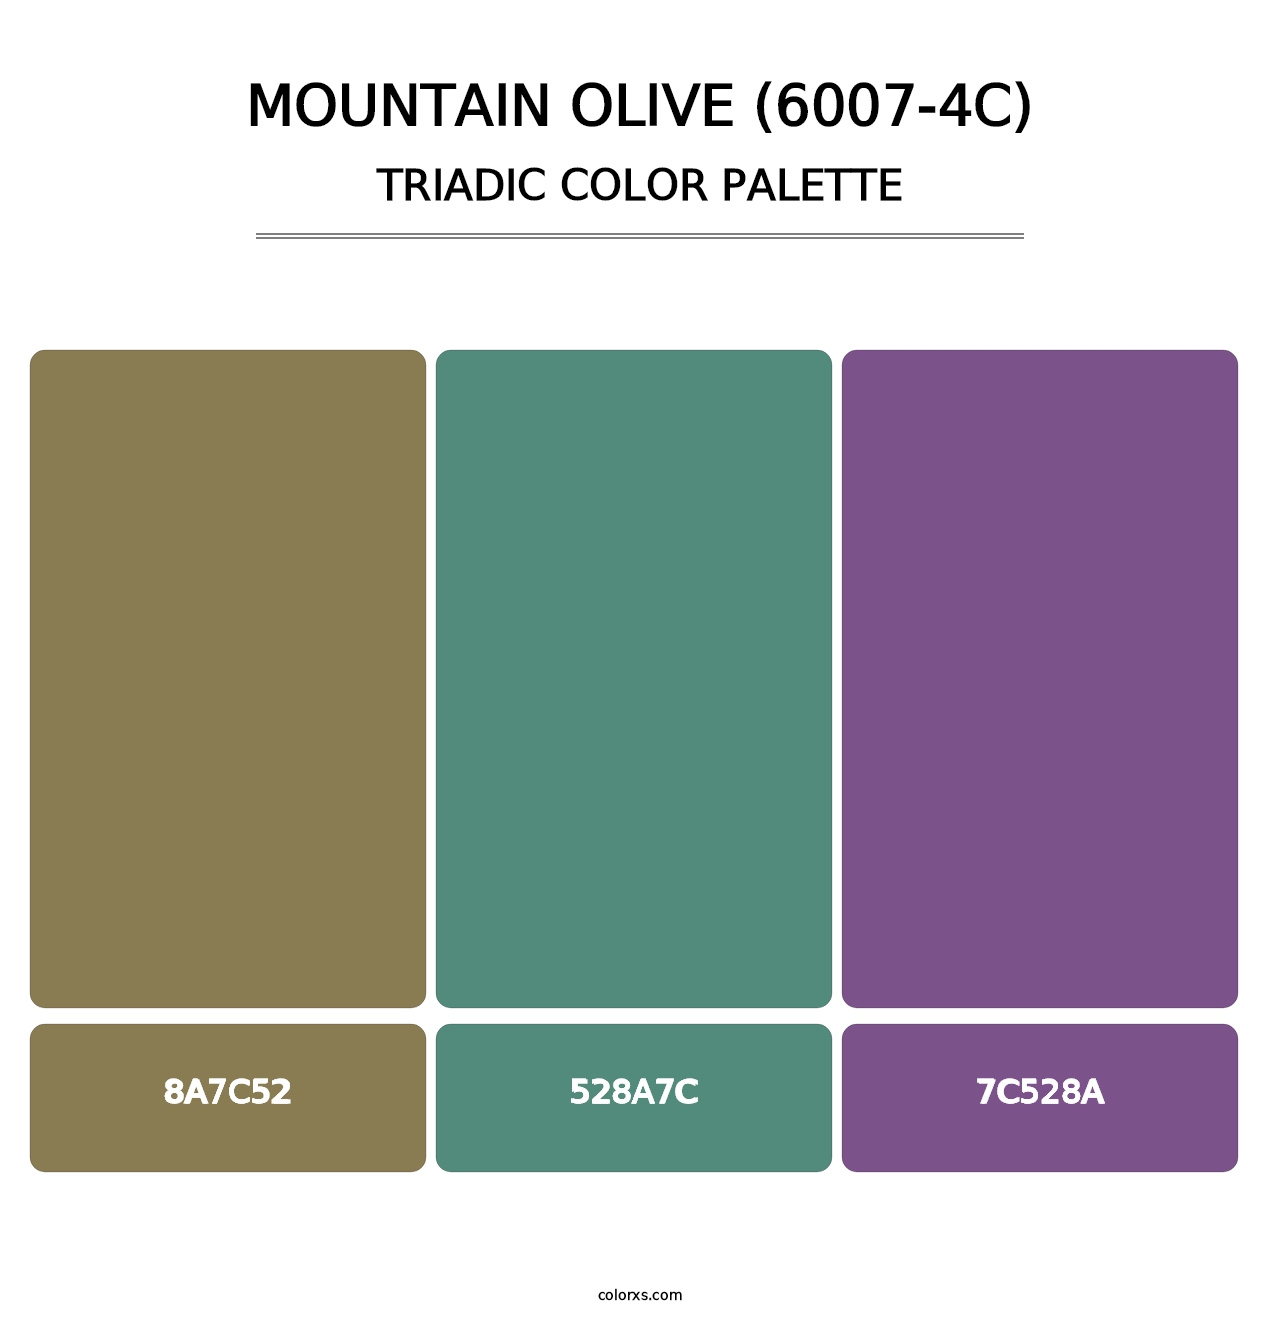 Mountain Olive (6007-4C) - Triadic Color Palette